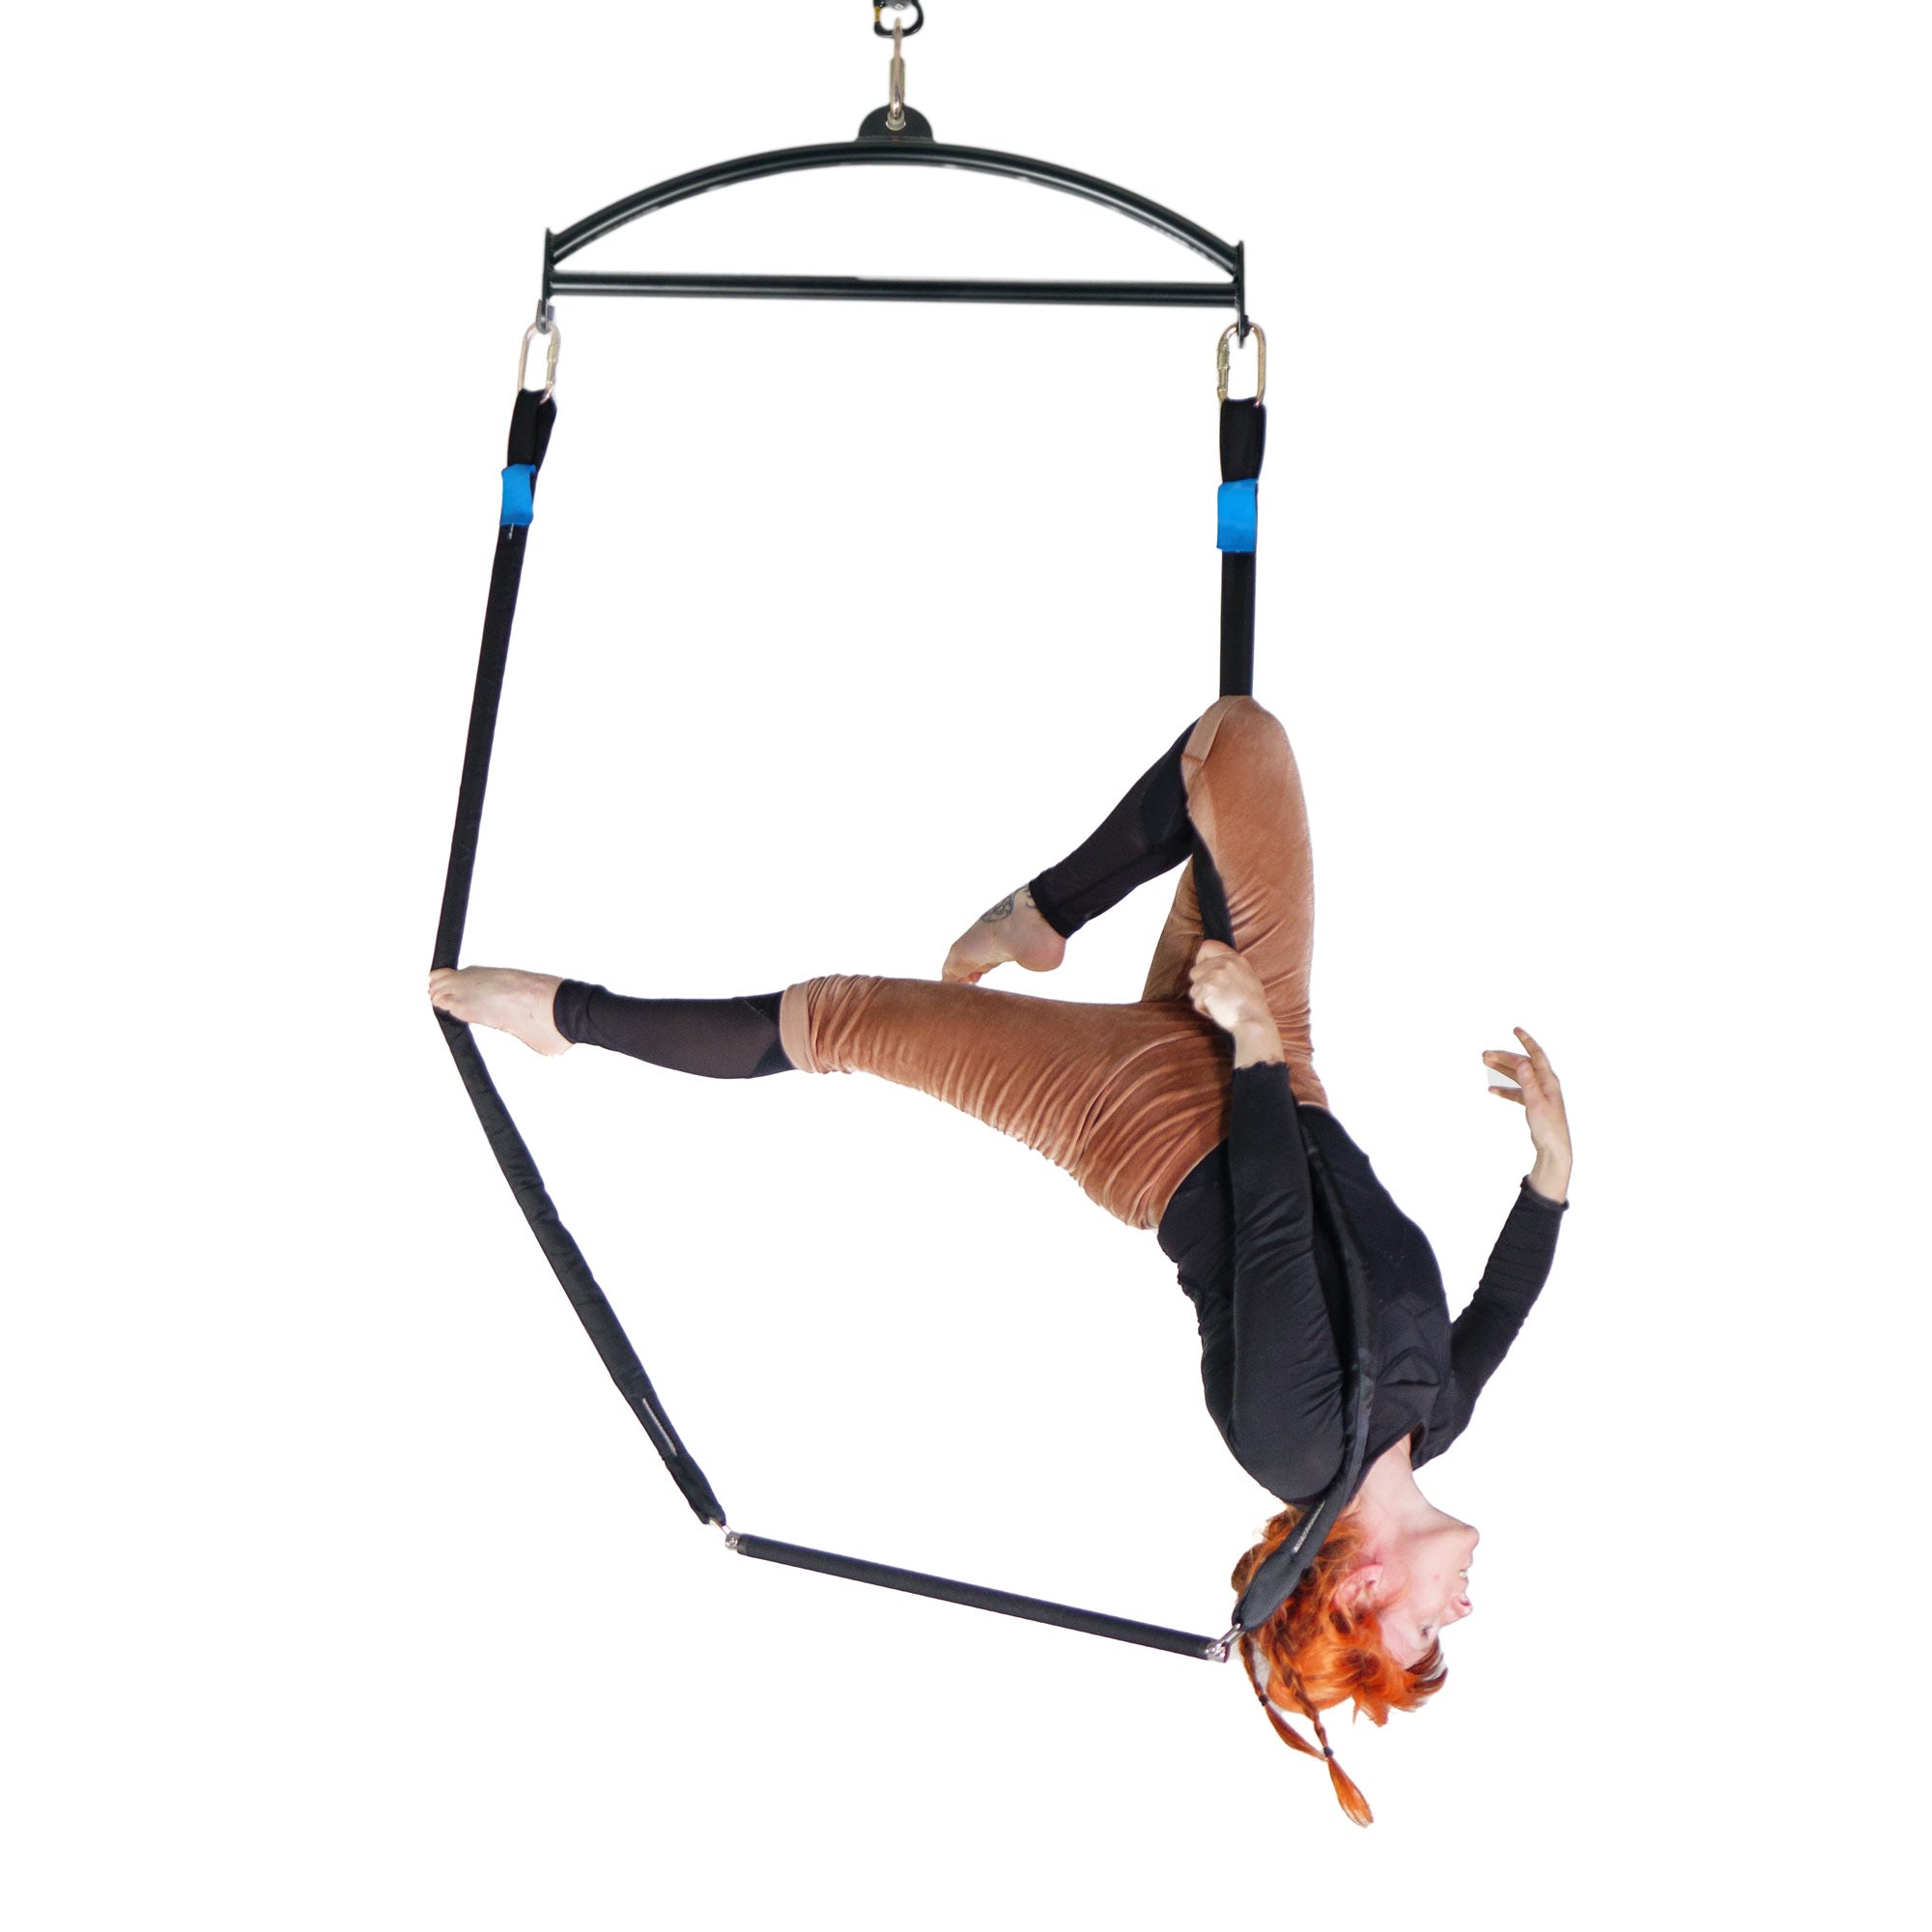 Trapeze attached to spreader bar with performer